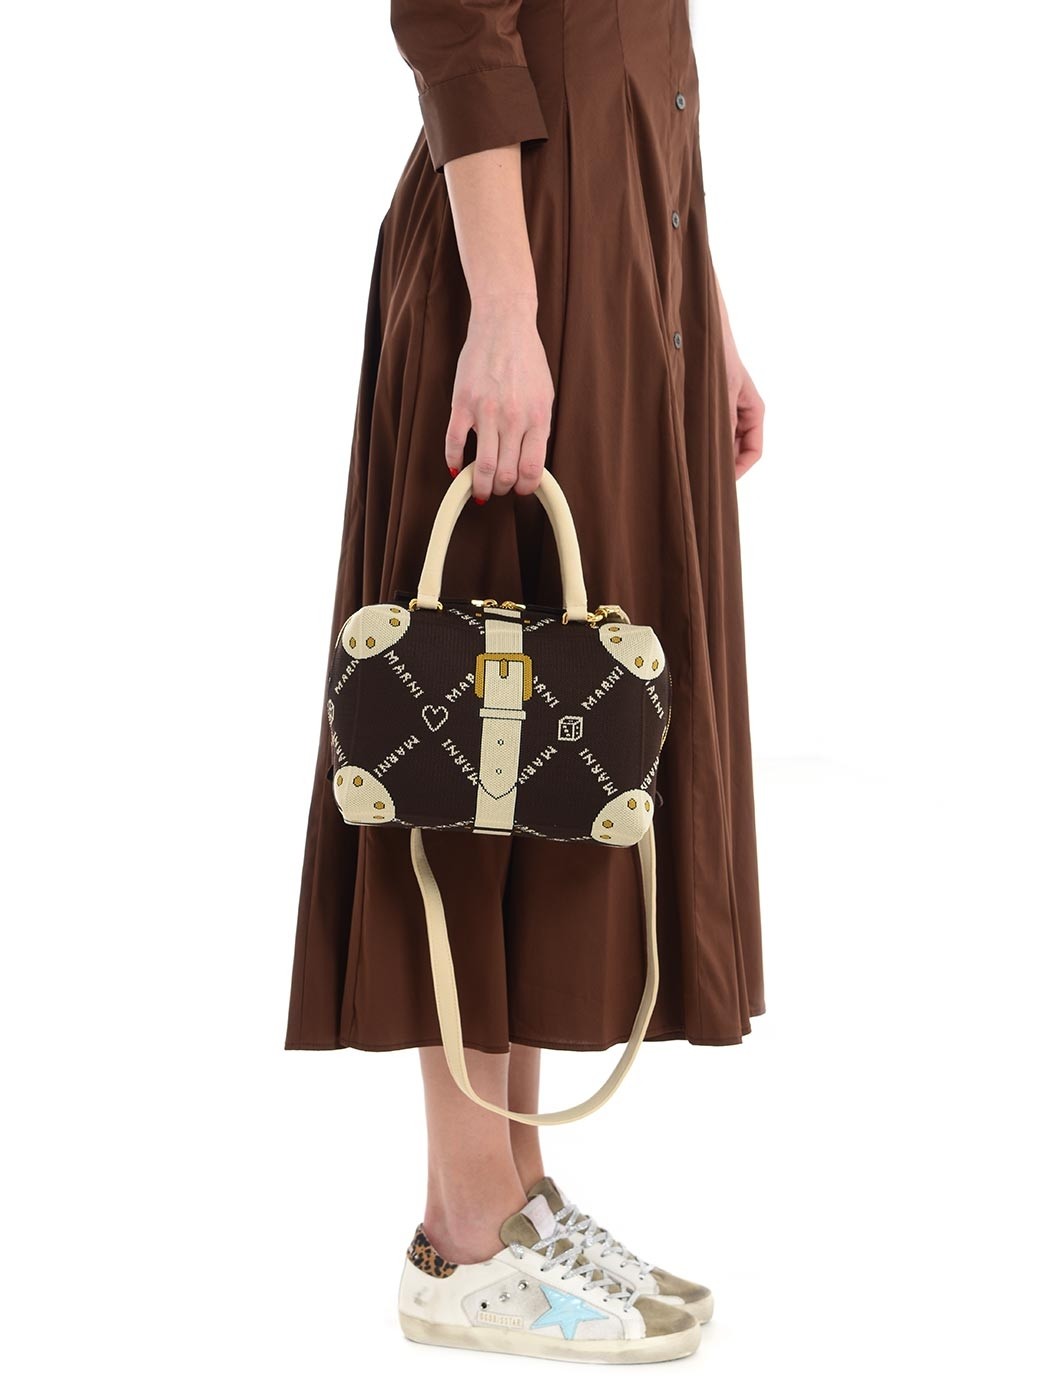  WOMAN BAGS,SPRING SUMMER COLLECTION,GIVENCHY BAGS,MARNI BAGS,LES PETITS JOUEURS BAGS  MARNI BMMP0094A1